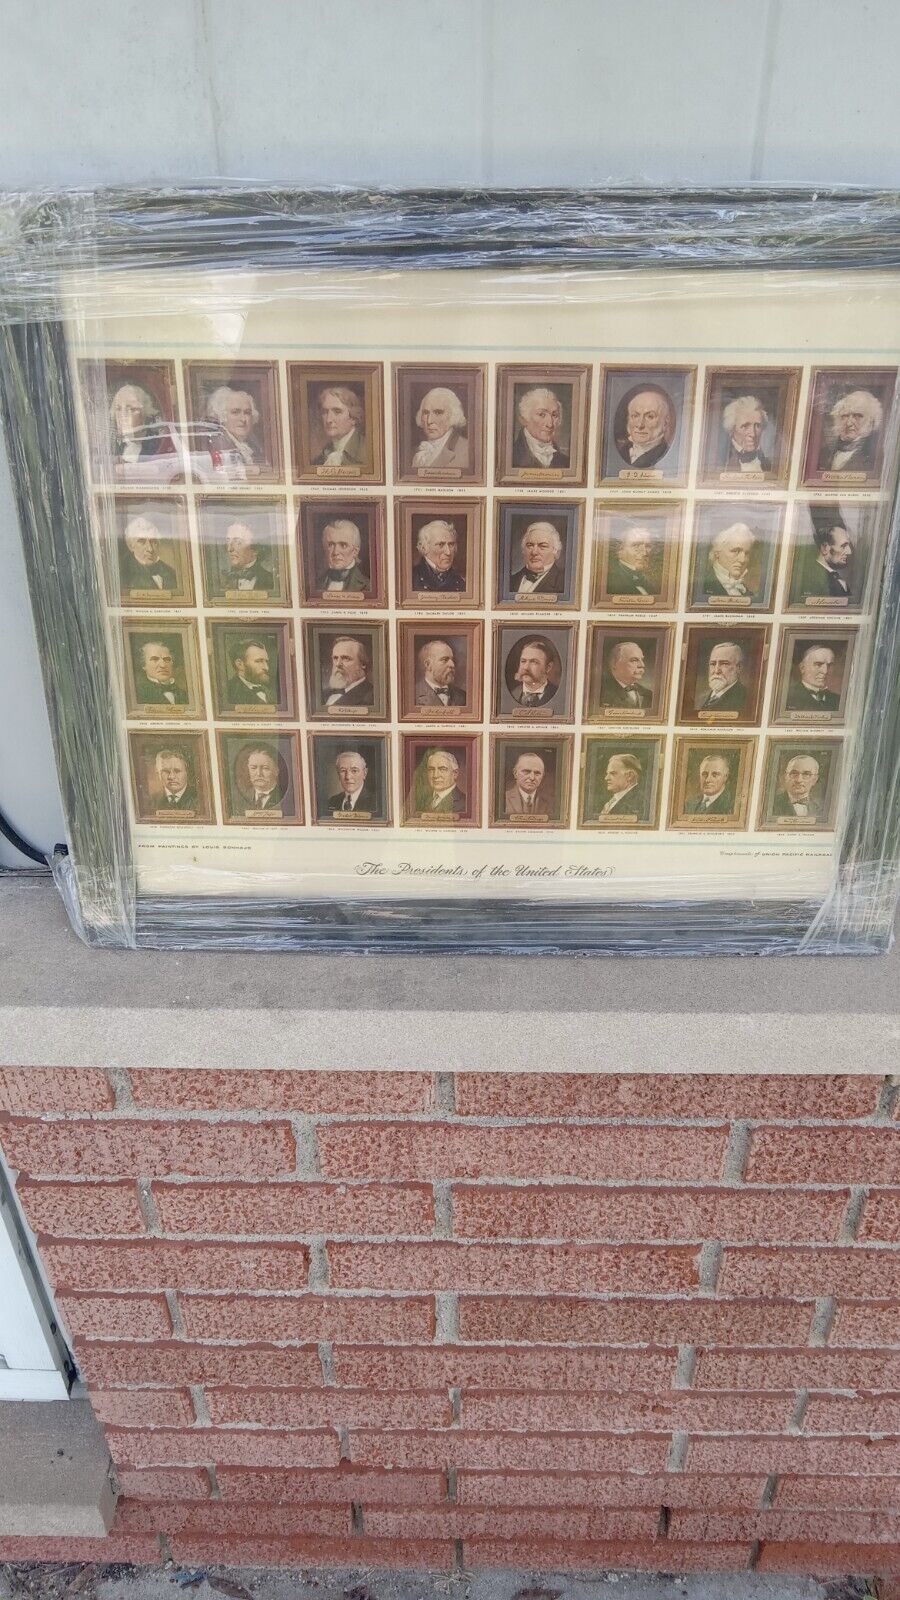 Union Pacific Railroad First 32 Presidents of the United States Print In Frame